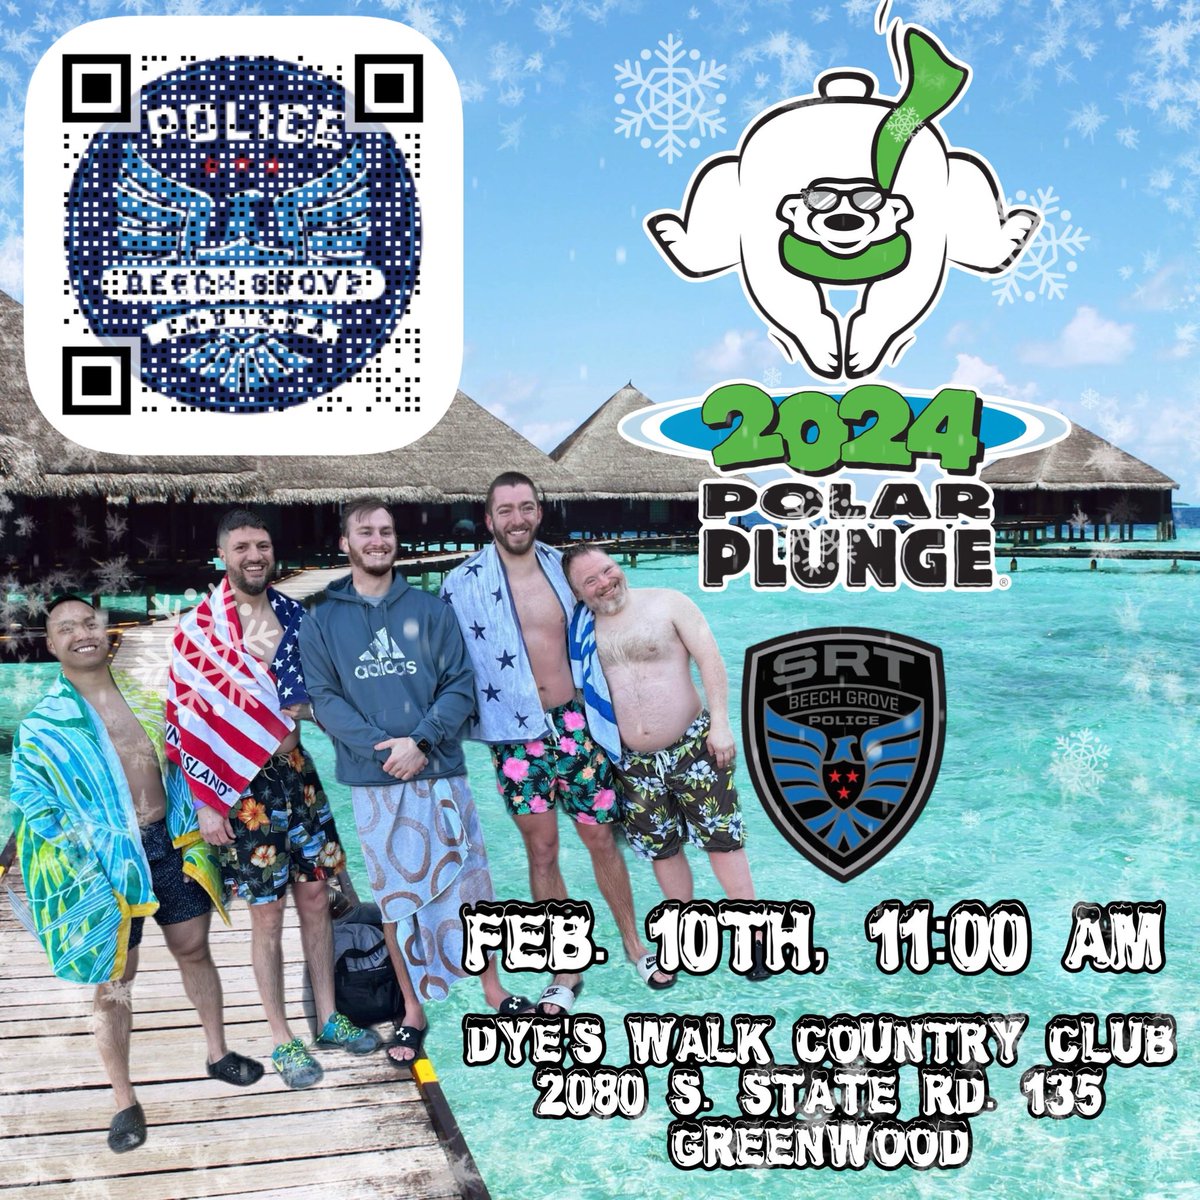 BGPD is taking the plunge tomorrow and maybe it won’t be so bad with a forecast of 53°! There’s still time support #SpecialOlympicsIndiana with a contribution to the Beech Grove Police team page or by using the fancy QR code: secure.e2rm.com/p2p/fundraisin… Thank you! #polarplunge